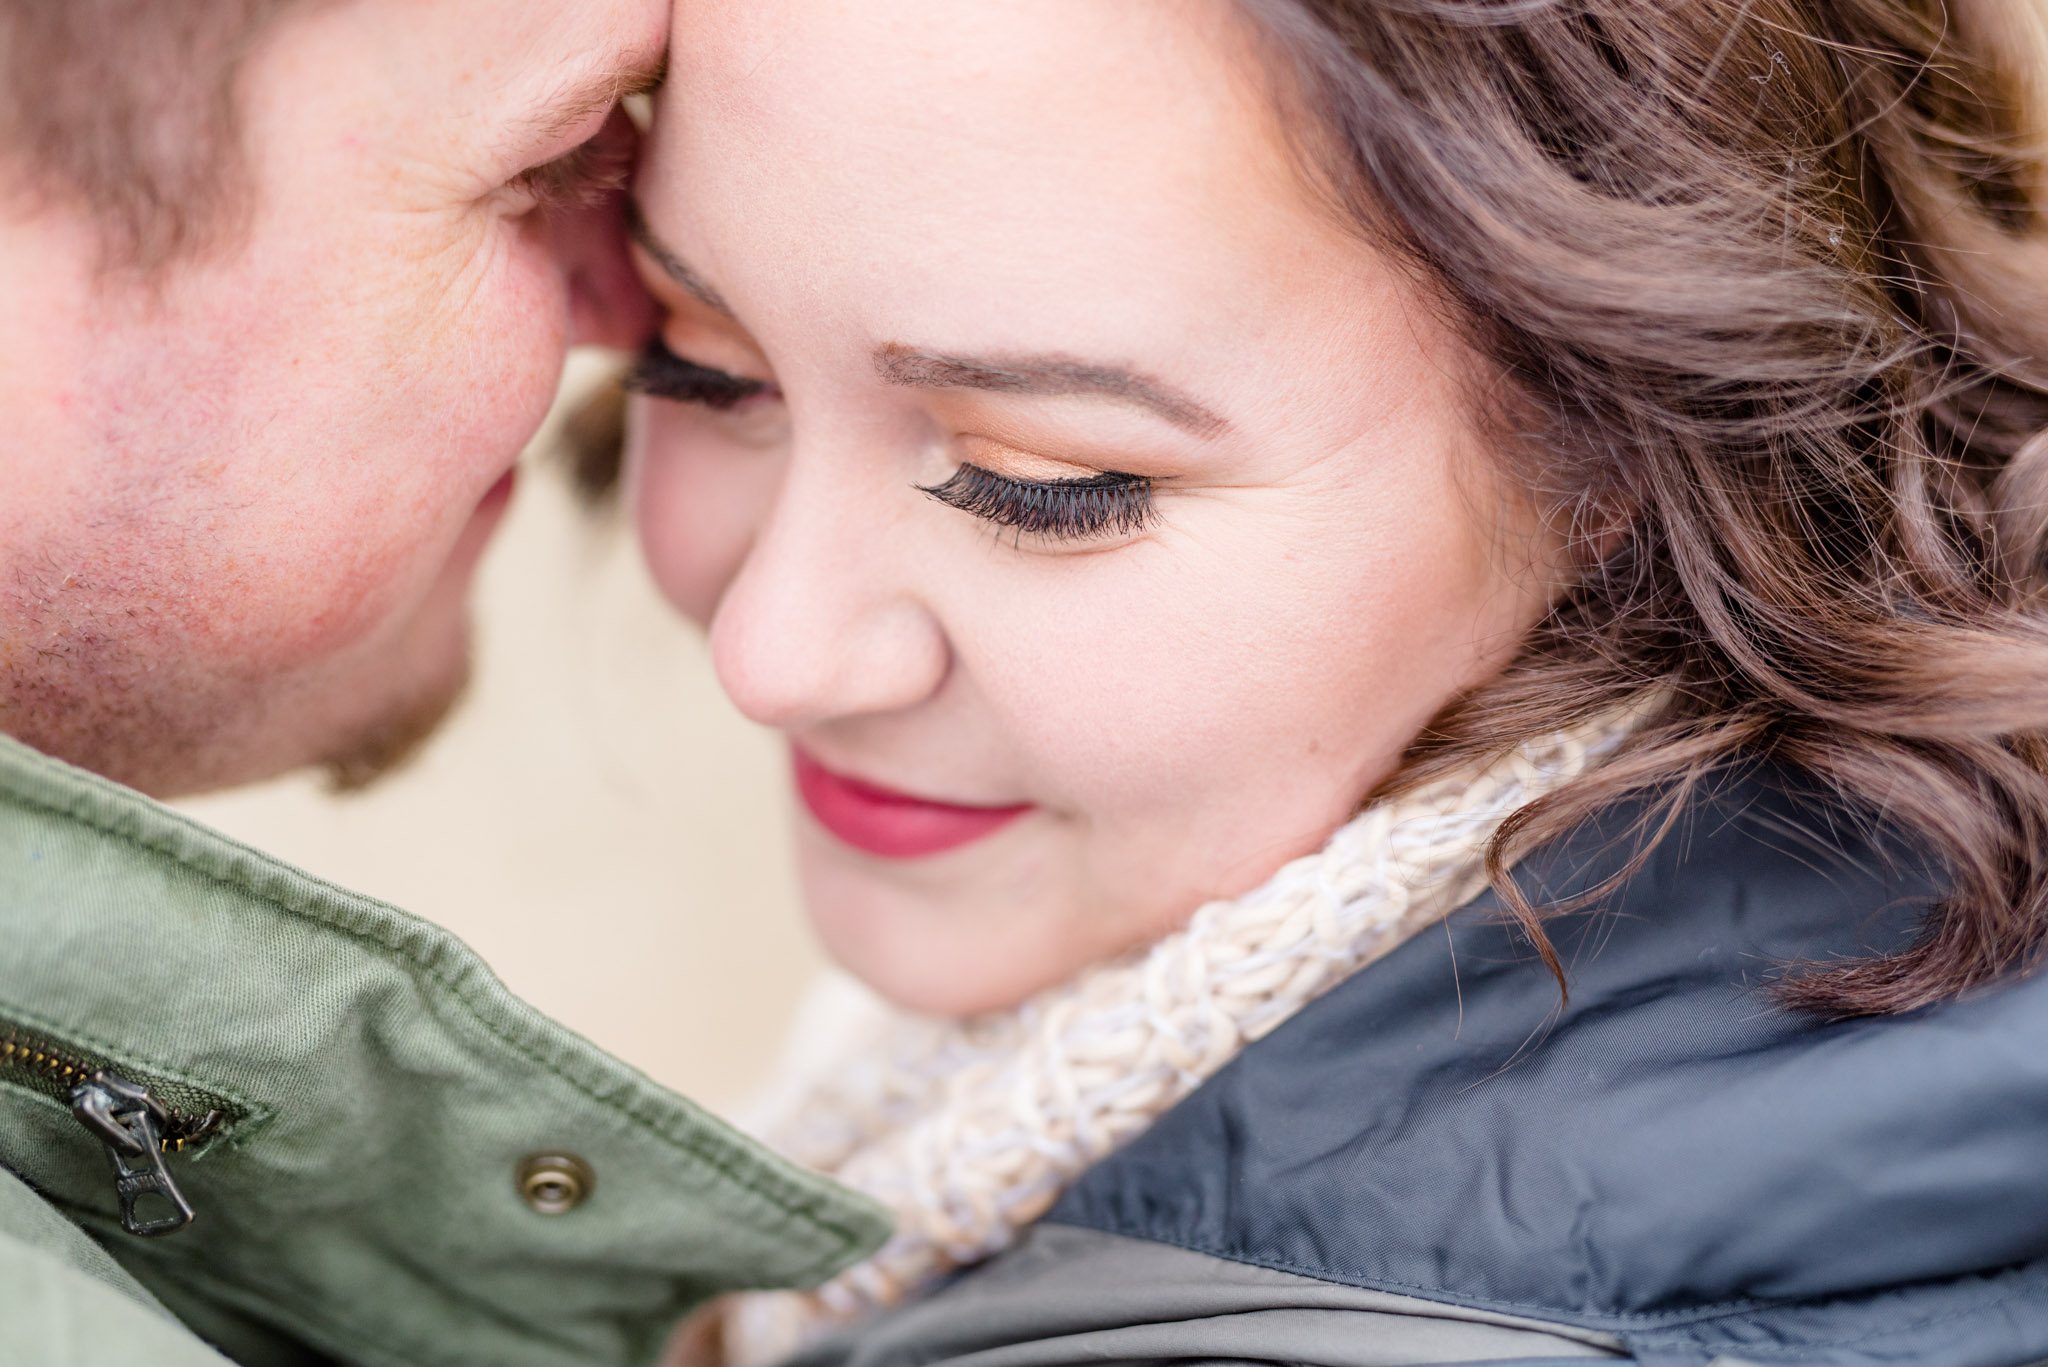 Closeup of engaged bride's makeup while hugging fiance.